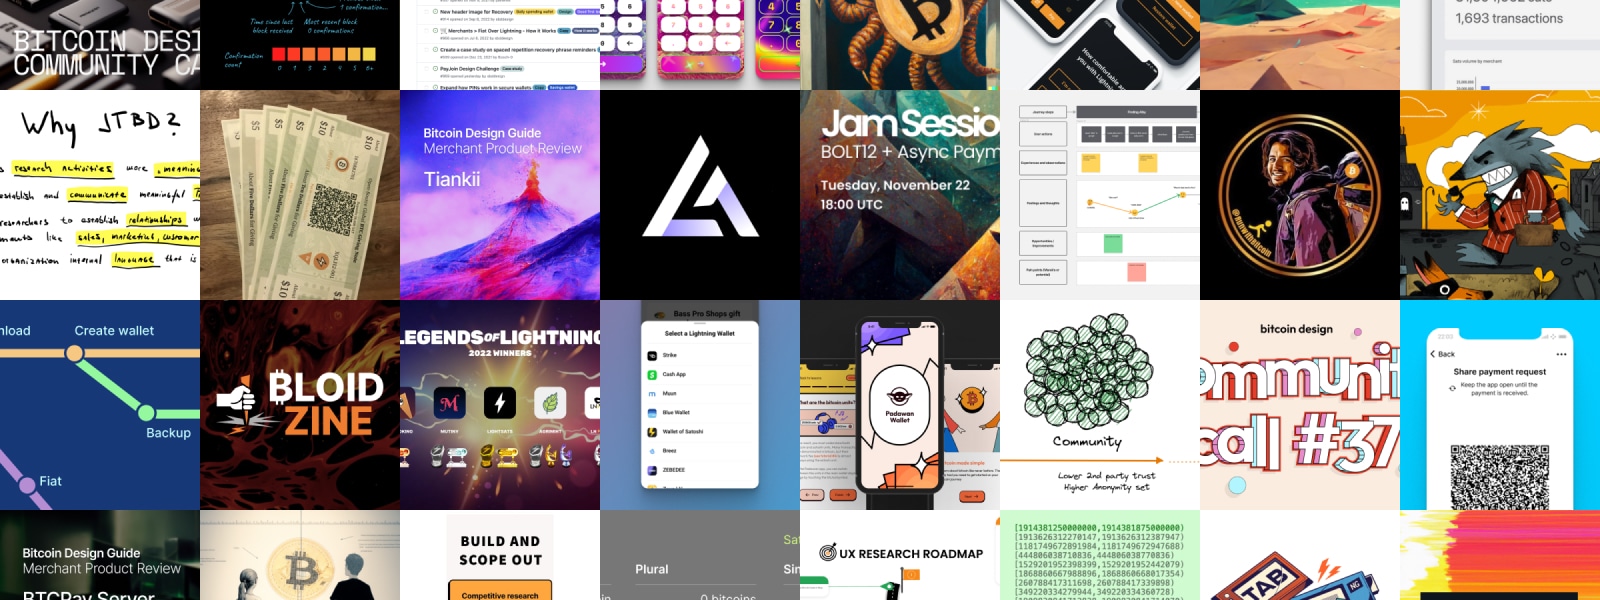 Grid of images from the Bitcoin Design newsletter content